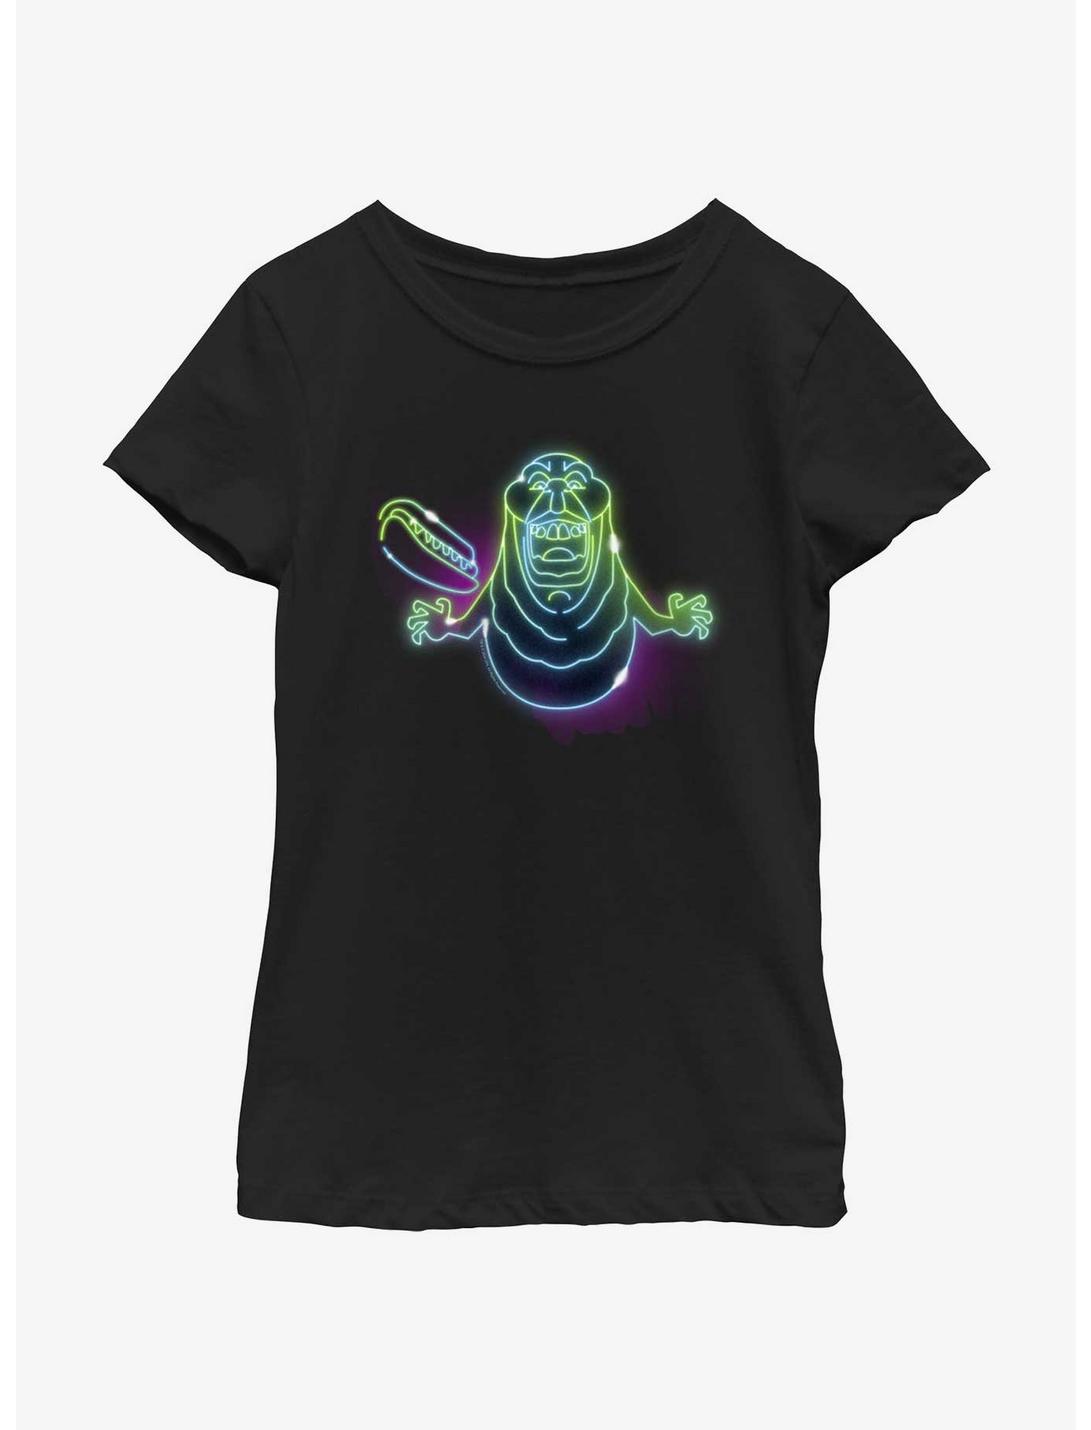 Ghostbusters: Frozen Empire Neon Lights Slimer Girls Youth T-Shirt, BLACK, hi-res